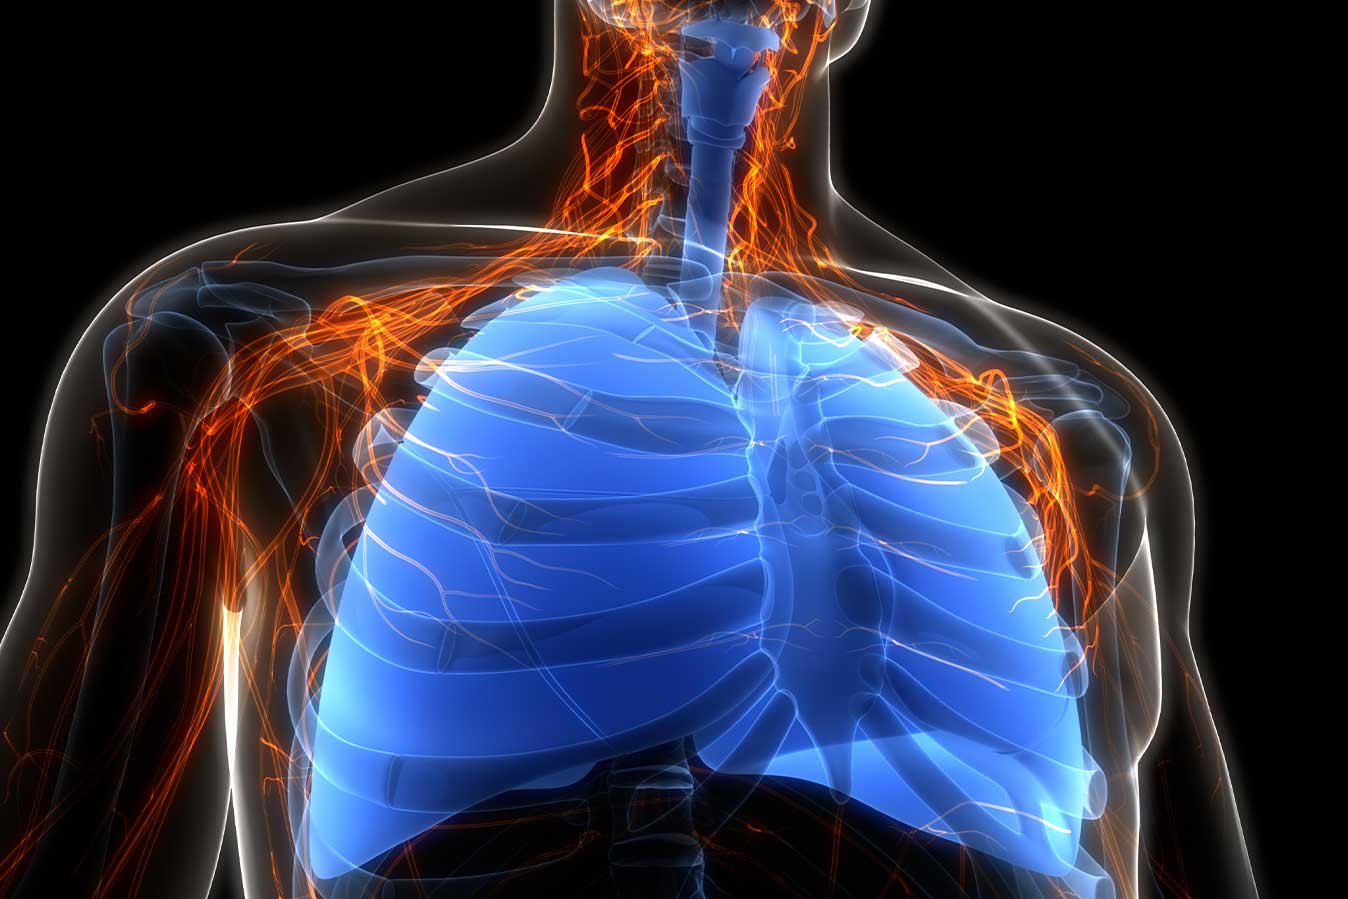 Have your say on the Chronic Obstructive Pulmonary Disease (COPD) Clinical Care Standard